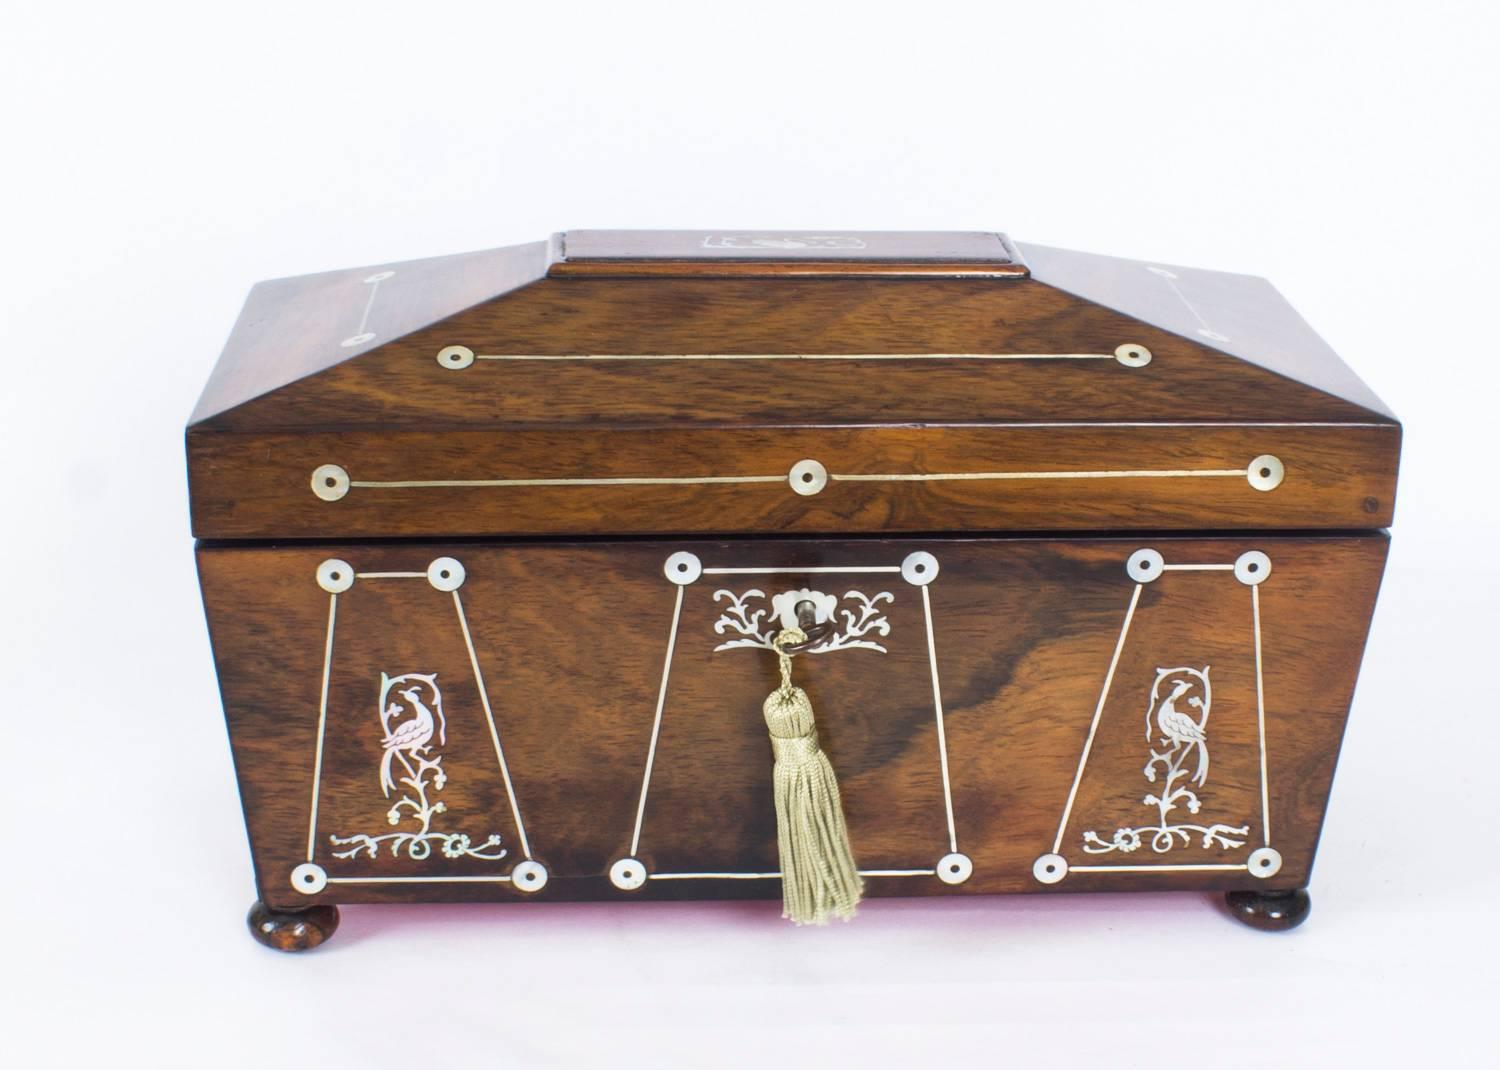 This is an elegant antique Regency mother-of-pearl inlaid rectangular casket, circa 1820 in date.
 
This exquisite collector's item has beautiful mother-of-pearl inlaid decoration with bird motifs and stringing.

The interior features a